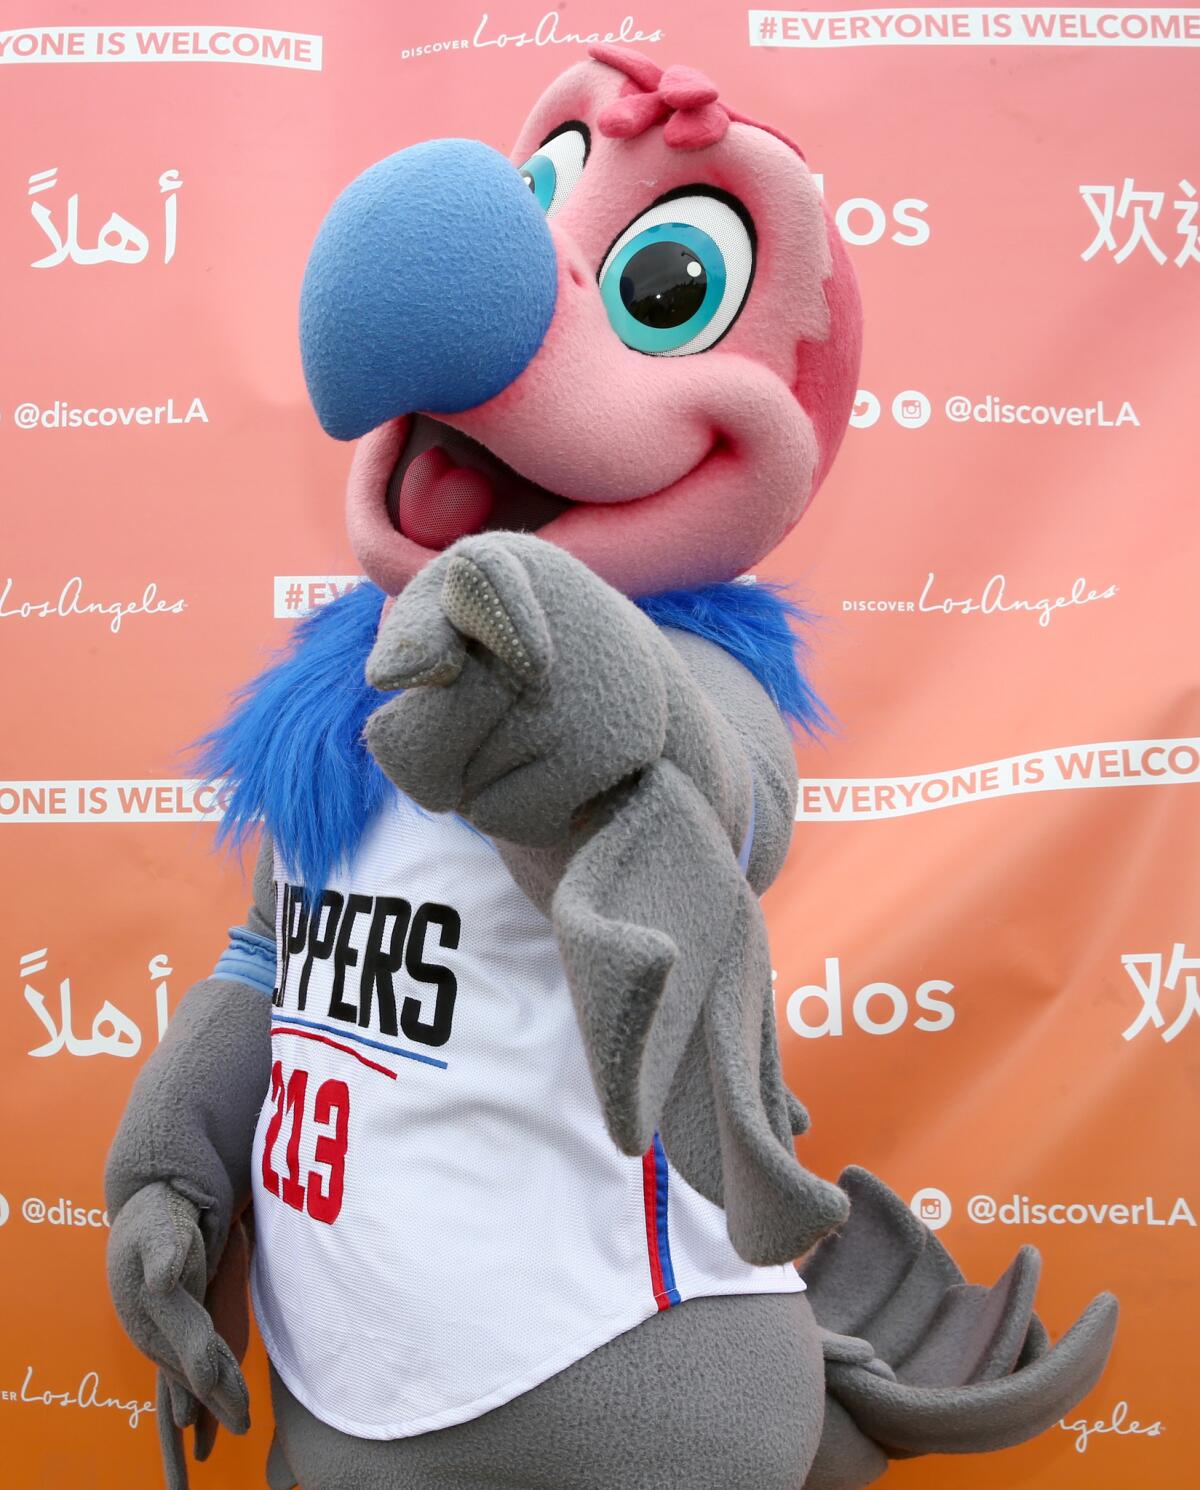 LA Clippers Mascot welcomes visitors to L.A. during Discover Los Angeles's Everyone is Welcome event.